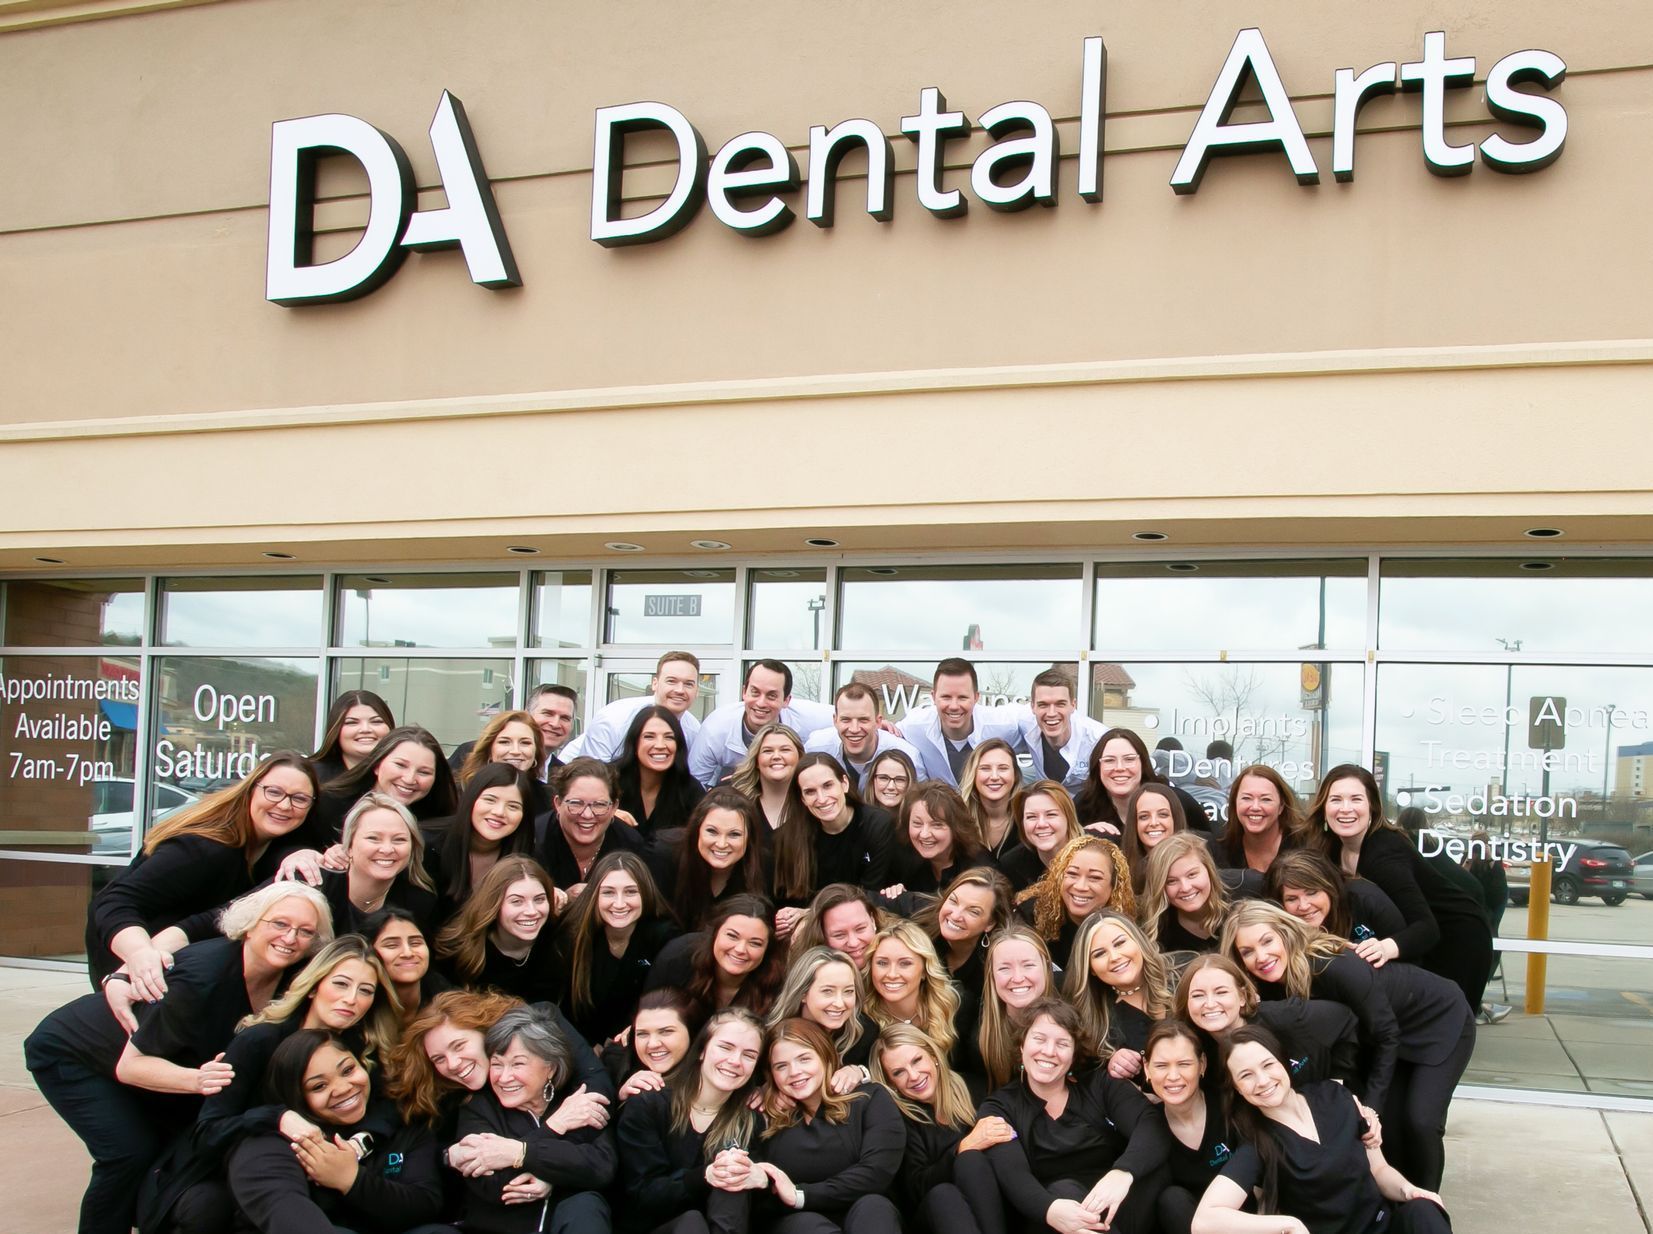 A group of people are posing for a picture in front of the da dental arts building